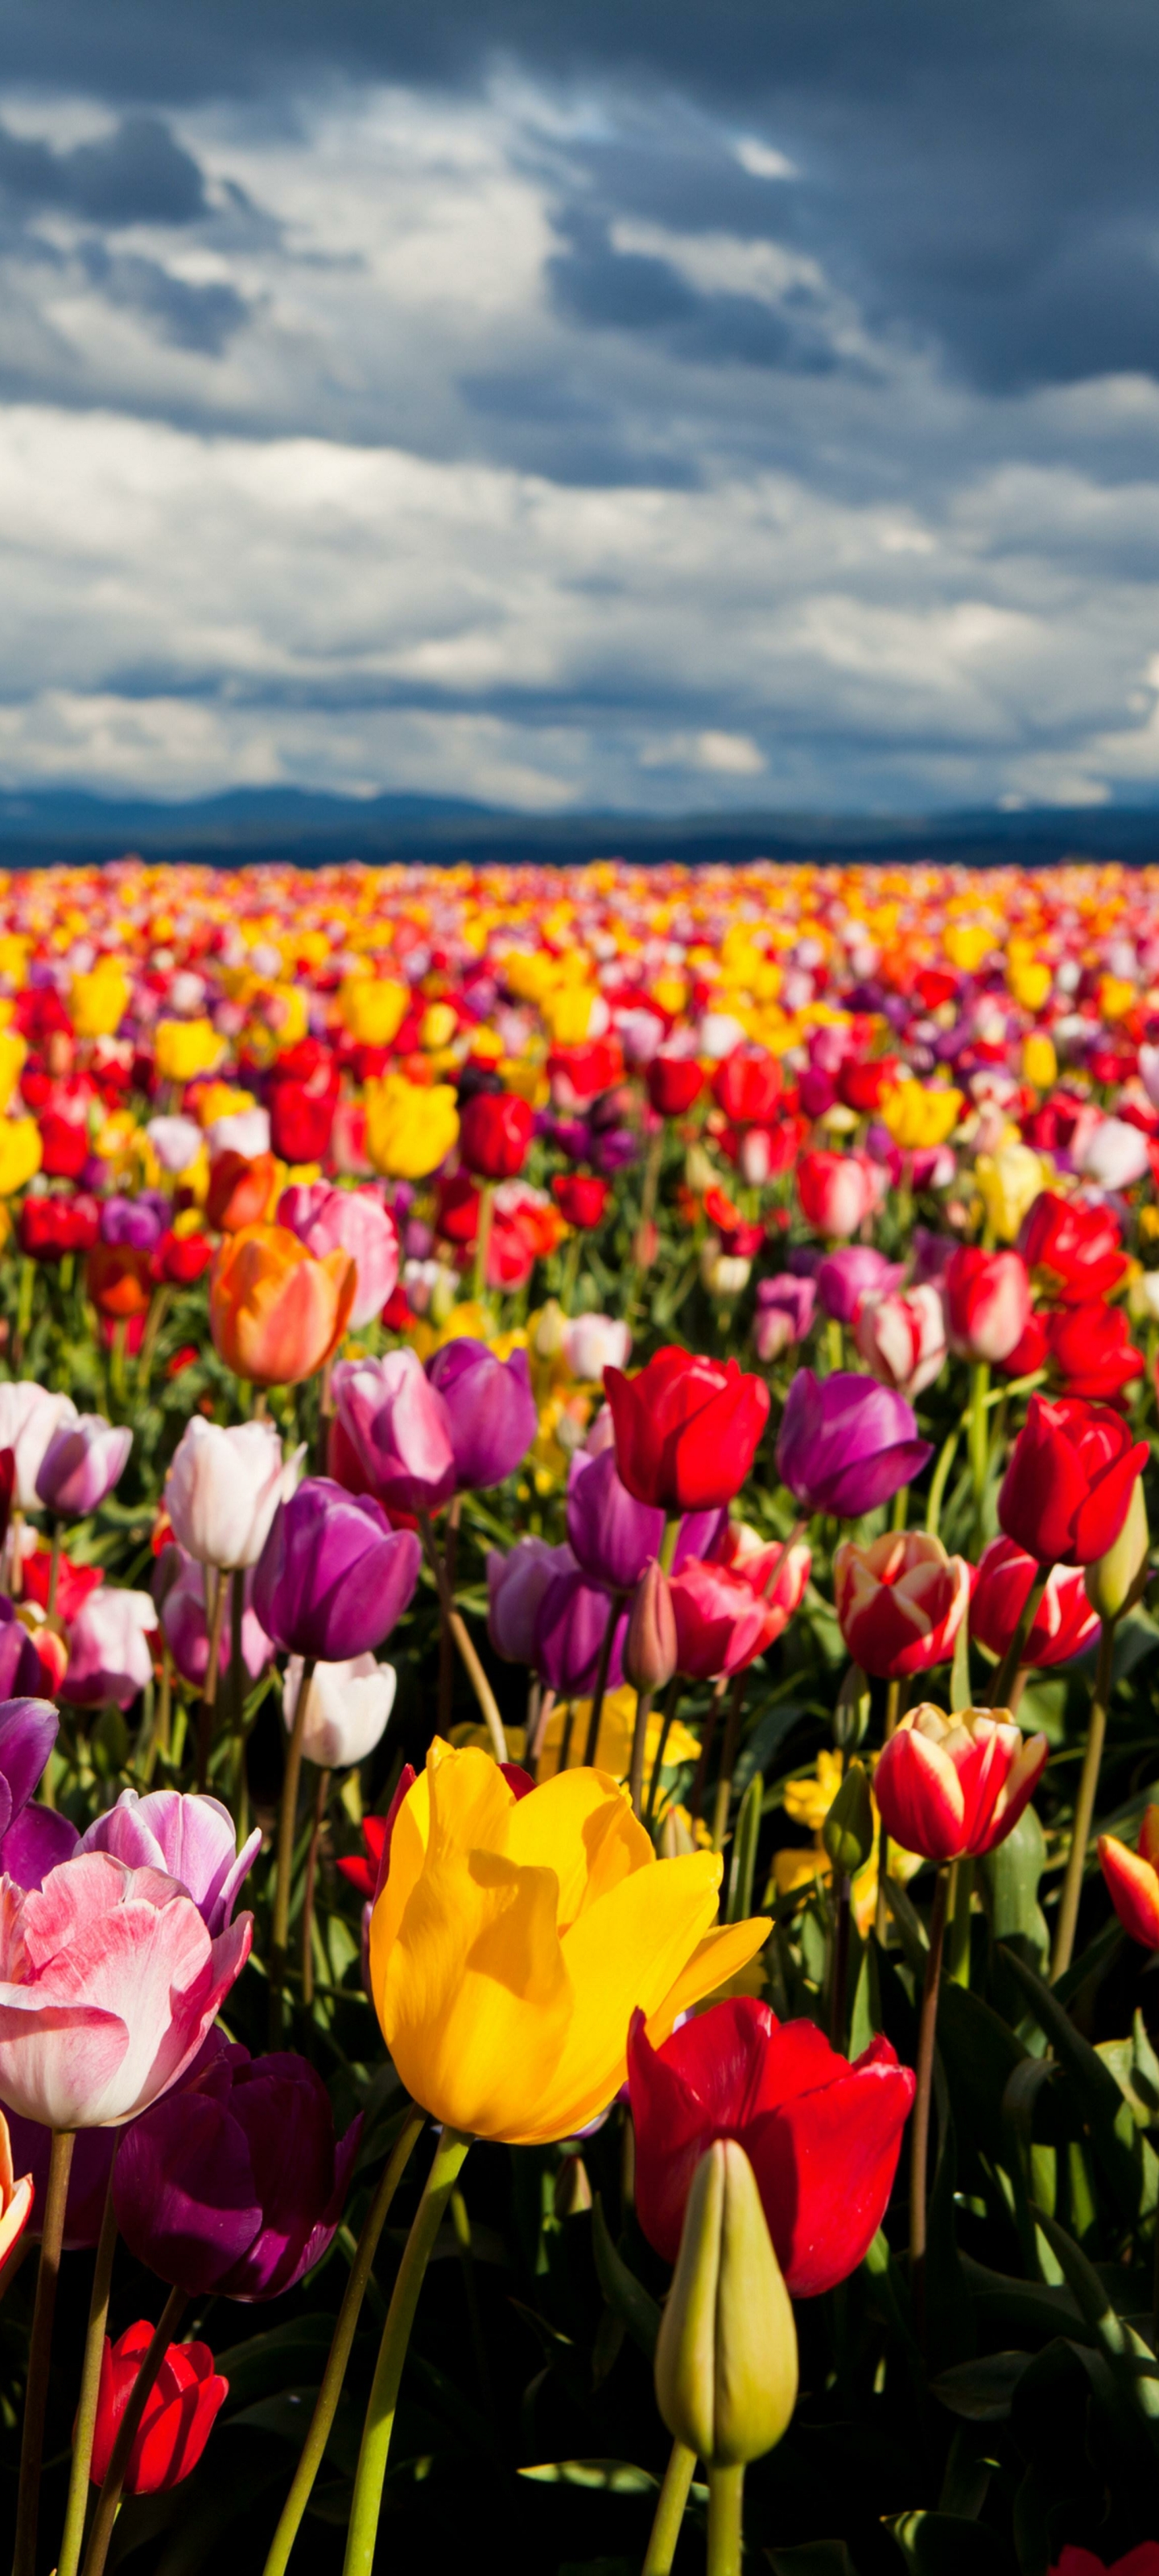 Mobile wallpaper: Landscape, Nature, Flowers, Flower, Earth, Field,  Colorful, Tulip, 1178256 download the picture for free.